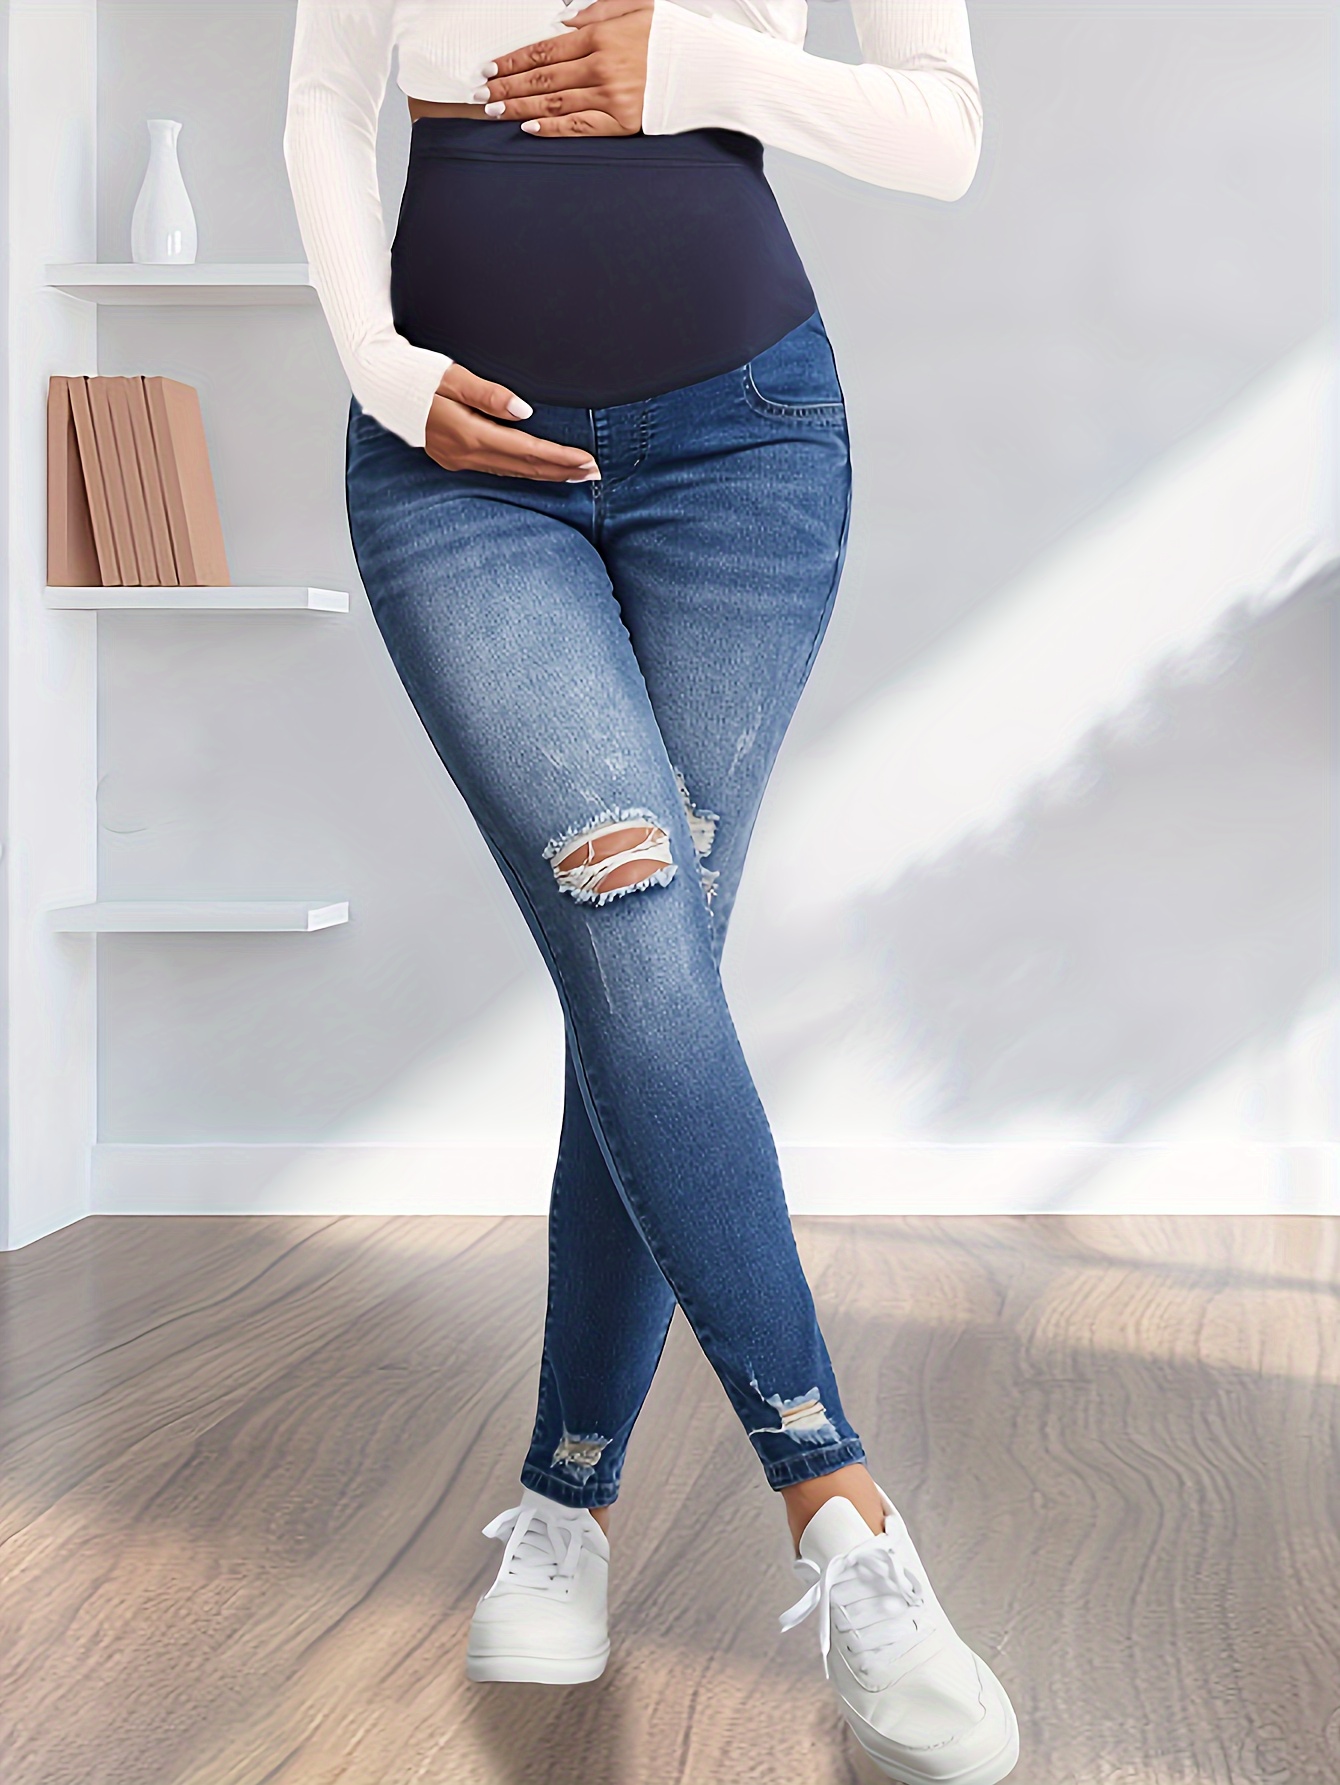 Women's Maternity Denim Pants Solid Vintage Style Jeans Highly Stretchy  Pants For Pregnant Women